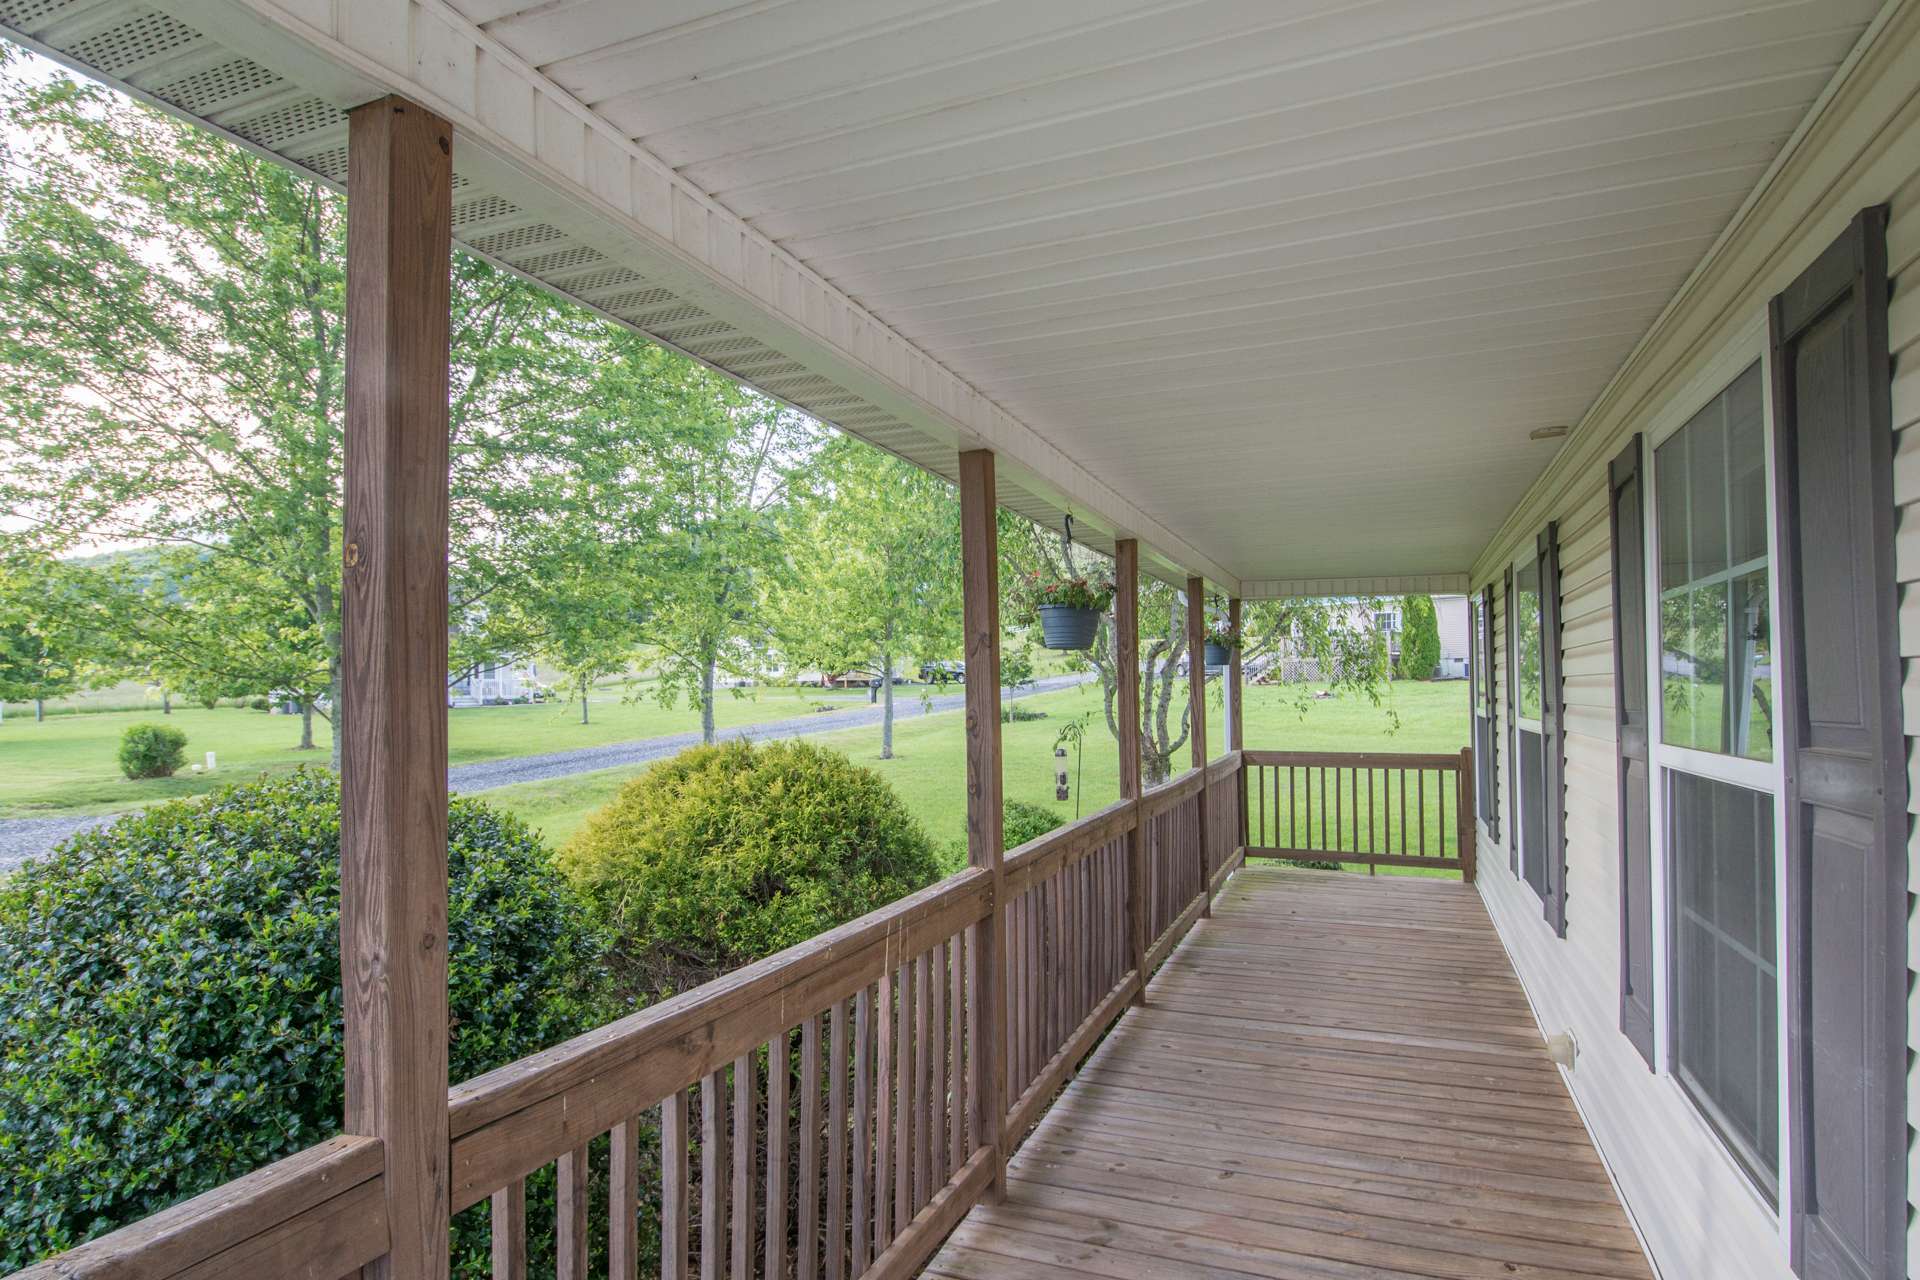 You will enjoy the full length covered front porch as well as the open back for grilling. There is an outbuilding for storing gardening tools and equipment.